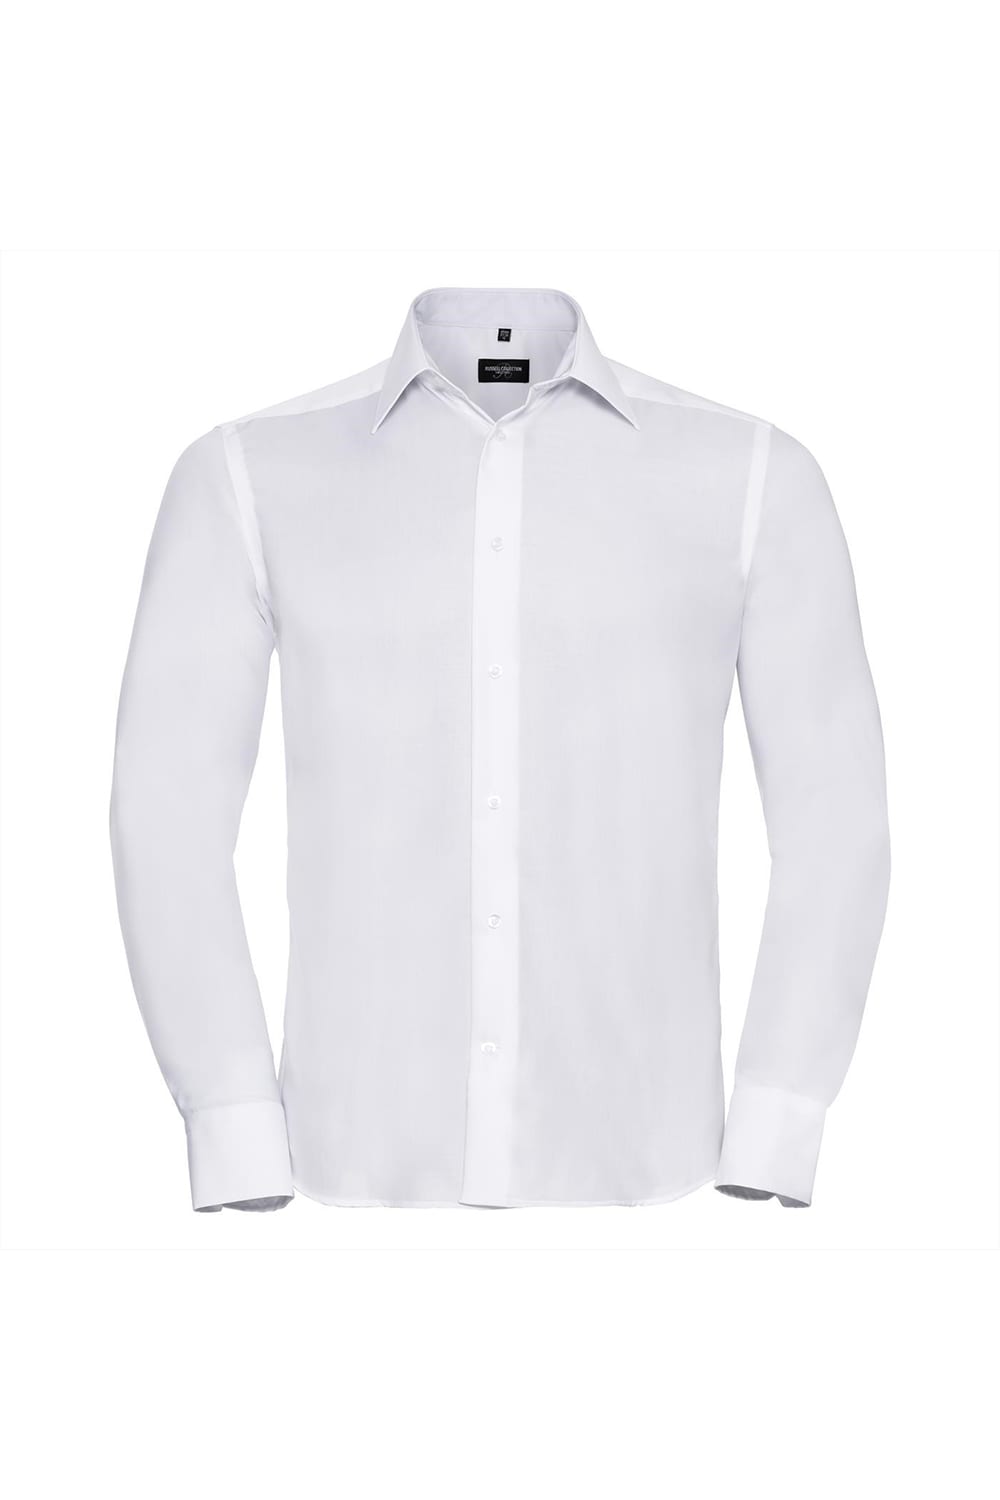 Russell Collection Mens Long Sleeve Ultimate Non-Iron Shirt (White)